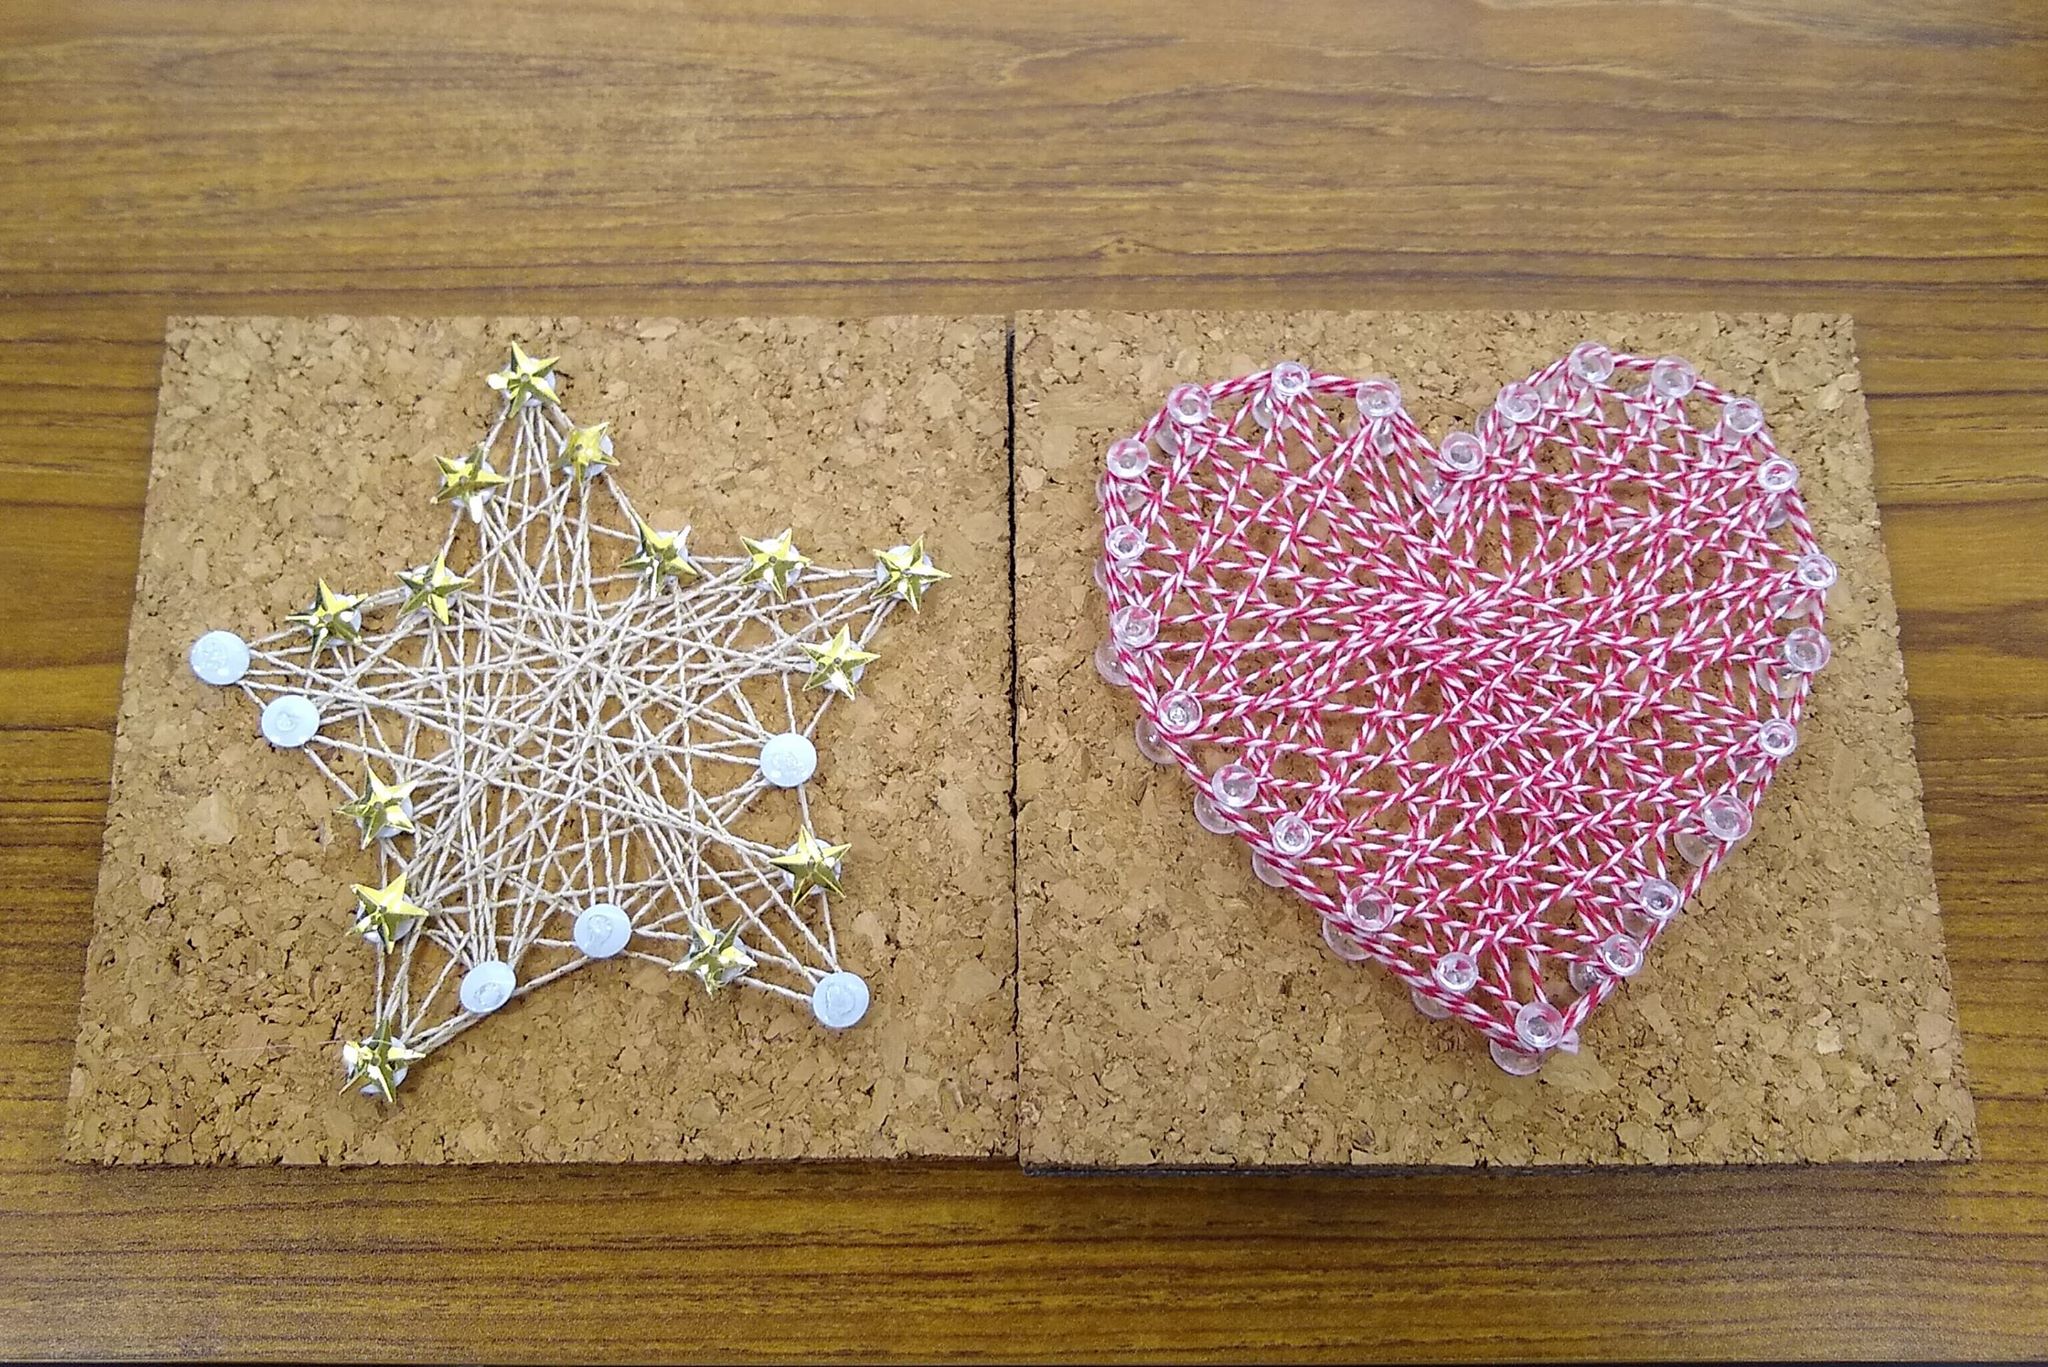 a photo of 2 cork boards with push pins and string, one is a star, the other is a heart